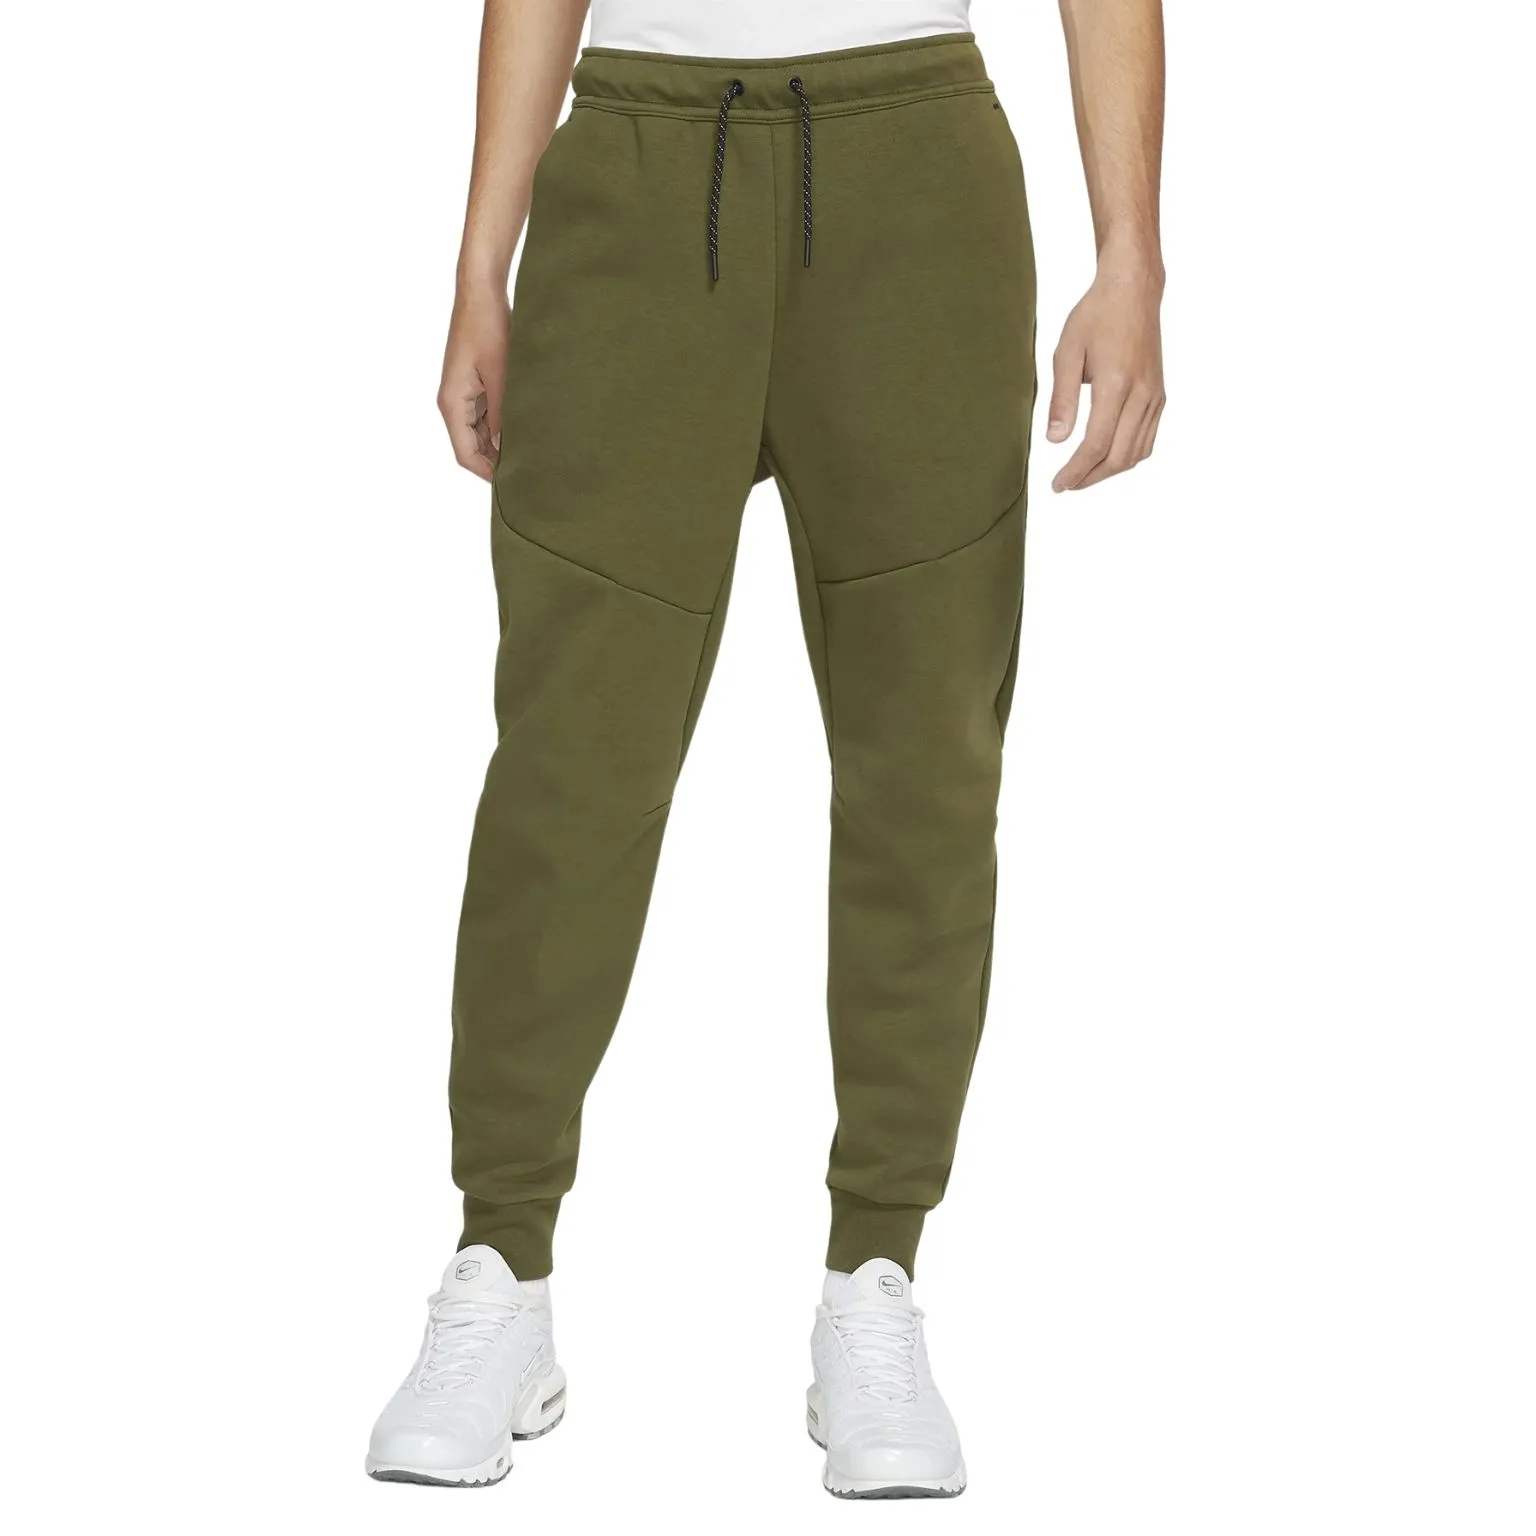 Fleece Joggers manufacturing with trendy design